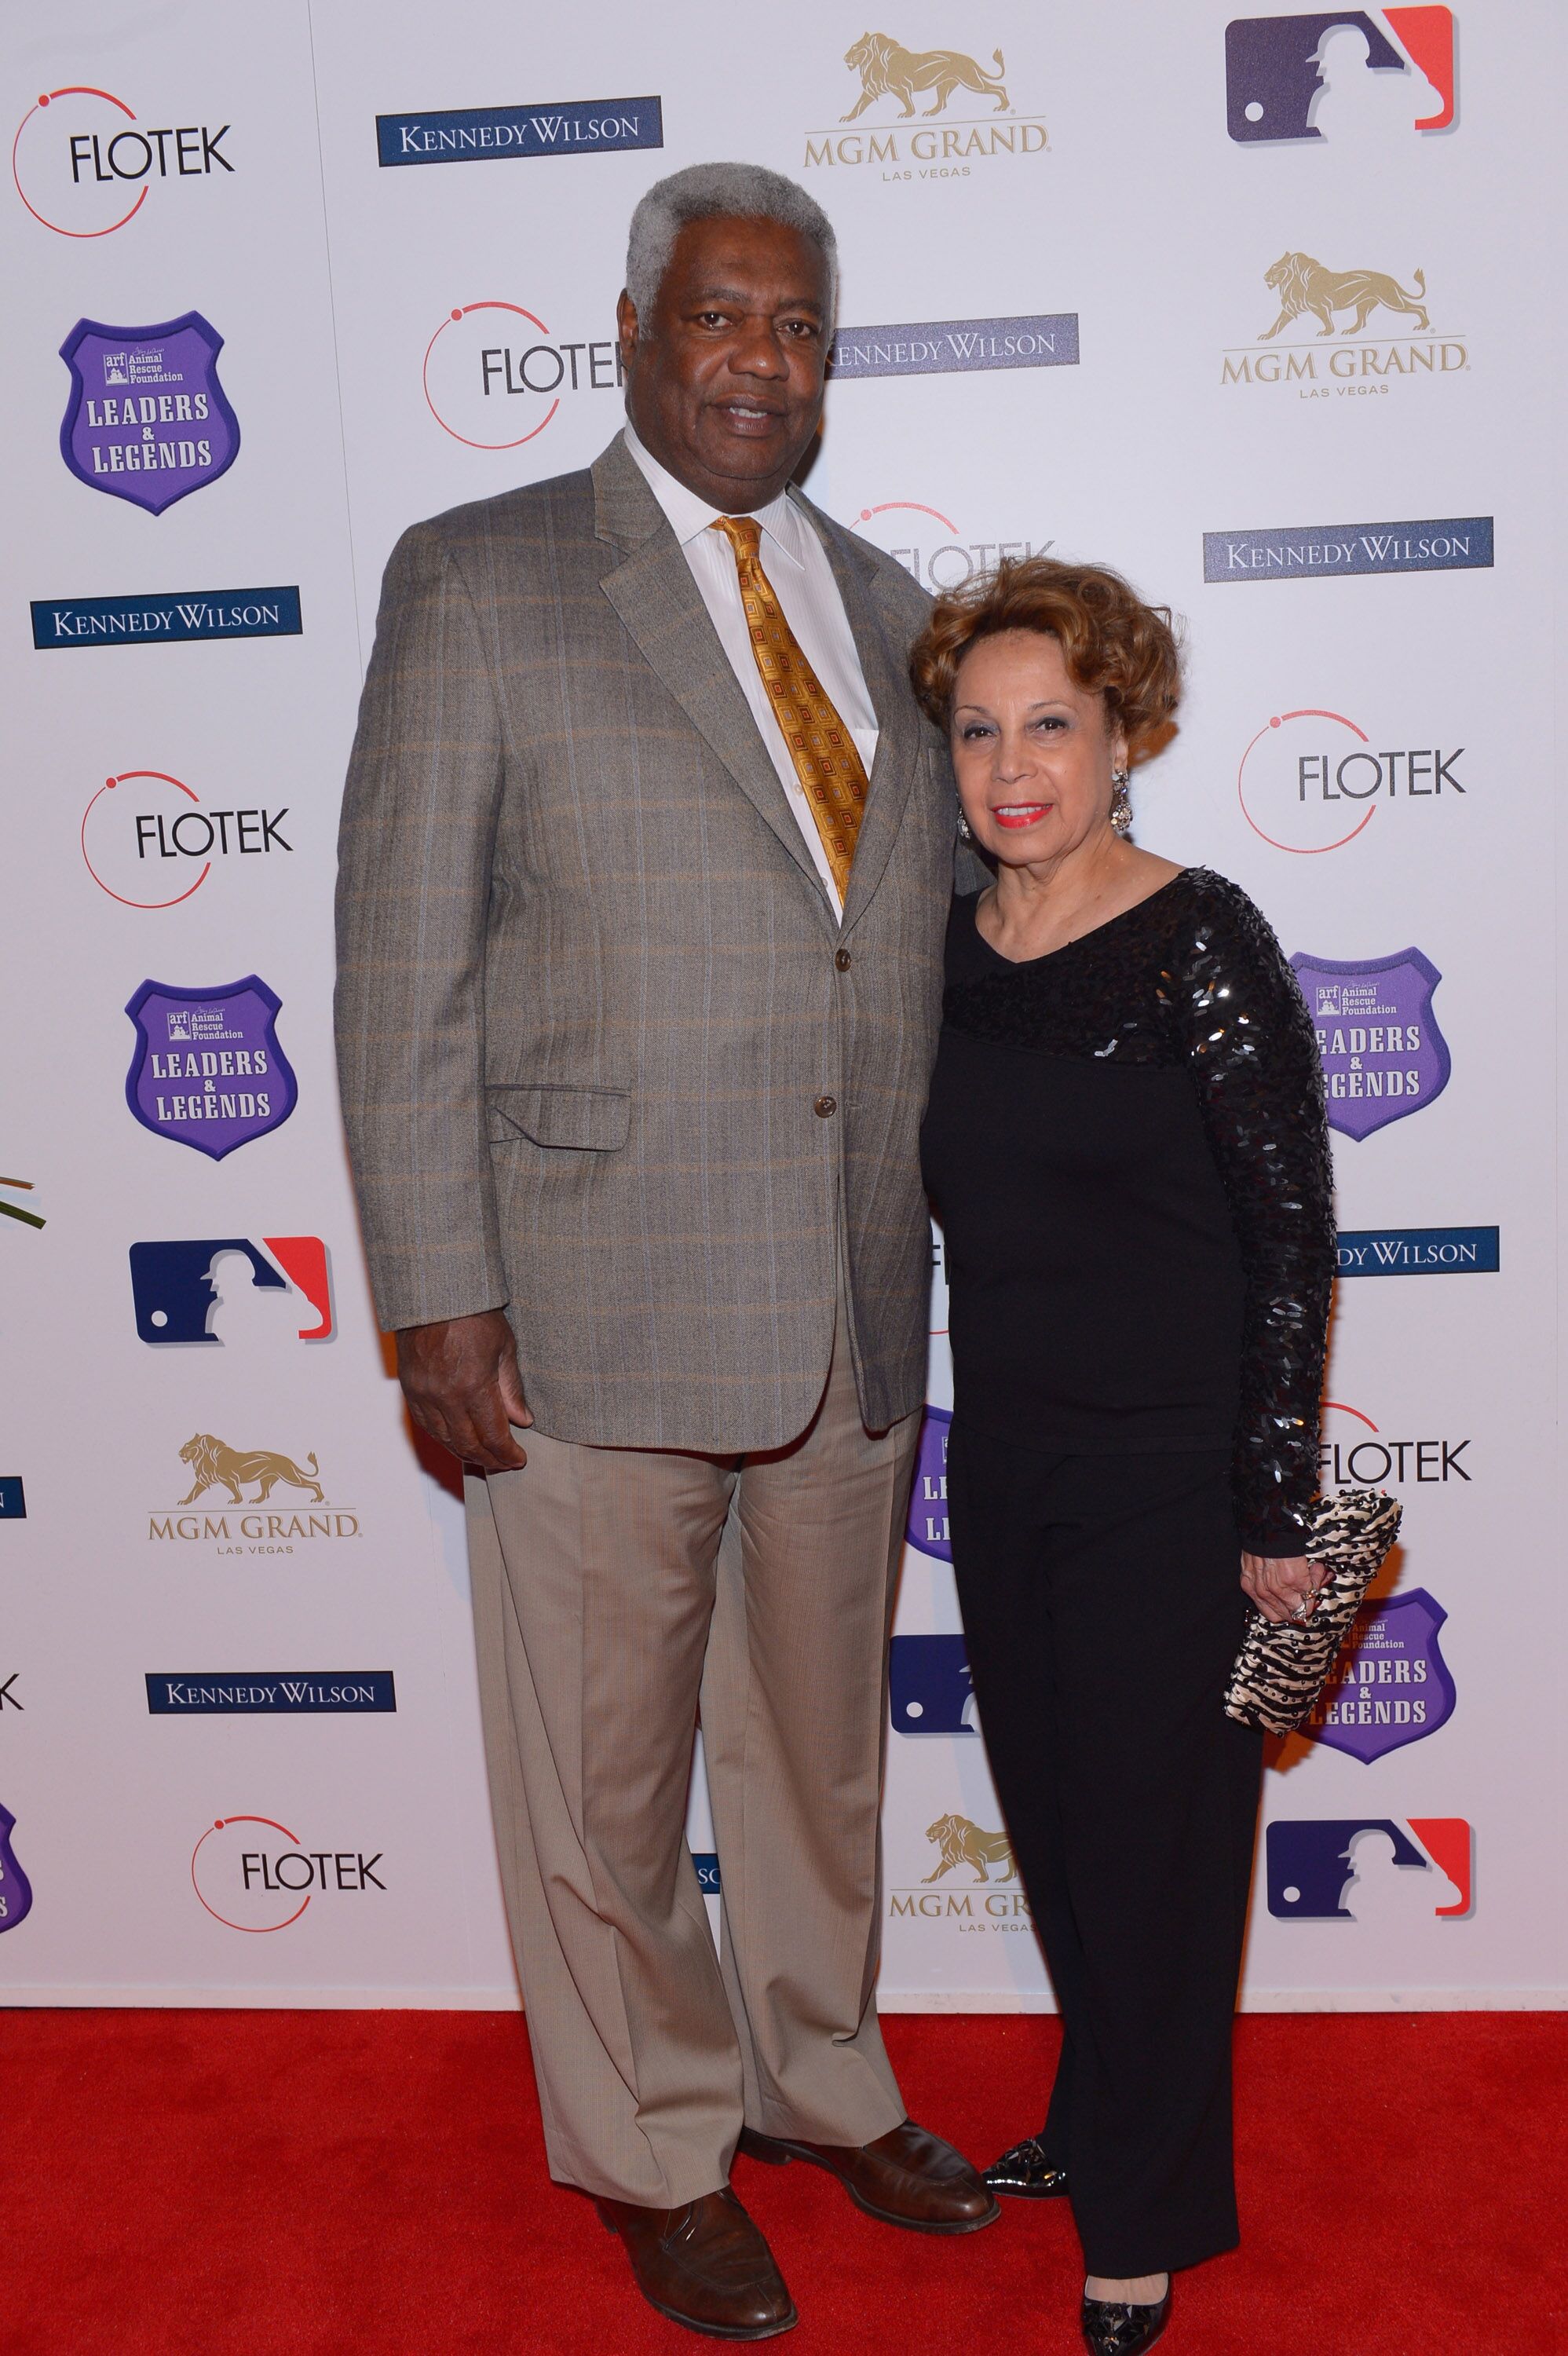 Oscar Robertson and wife Yvonne Crittenden at Tony La Russa's 2nd annual Leaders & Legends gala for Animal Rescue Foundation on November 22, 2013 | Photo: Getty Images 